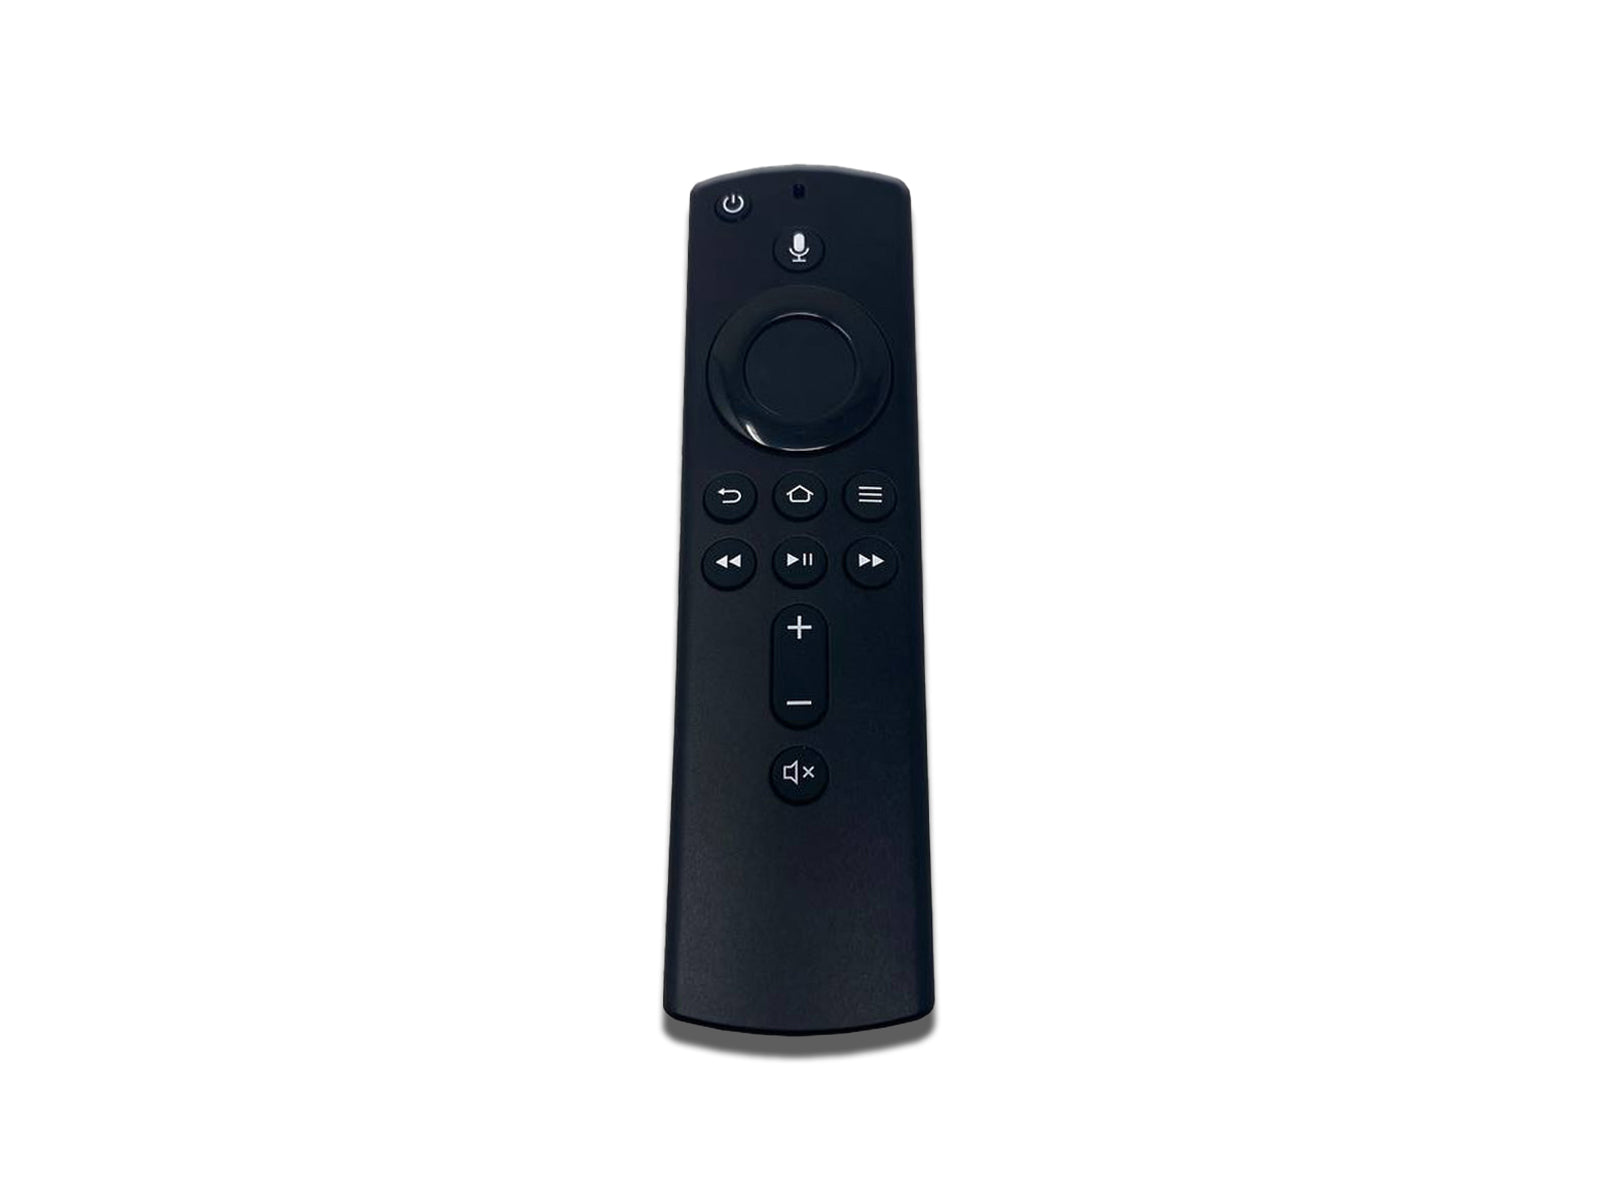 Image showing fire stick remote 2nd gen on the white background